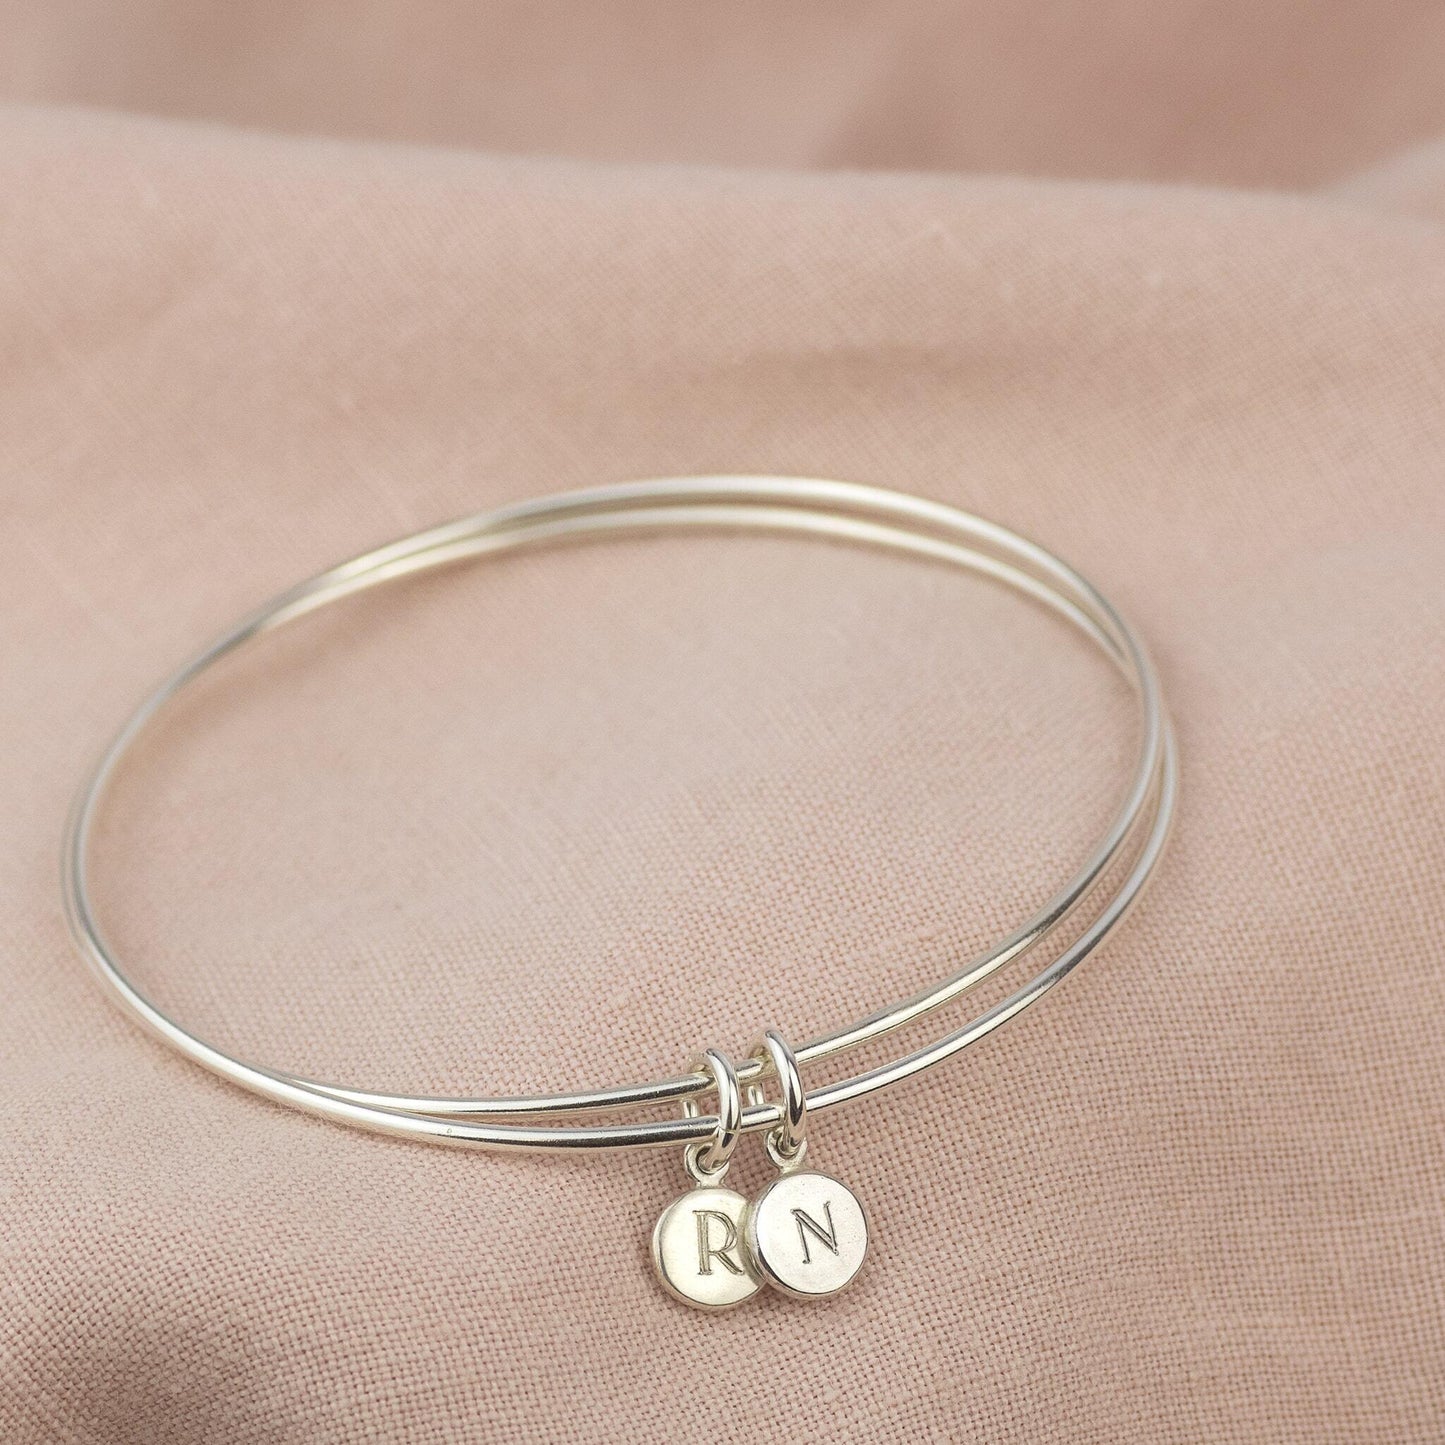 Personalised Mother Daughter Bracelet - Double Linked Bangle - Linked for a Lifetime